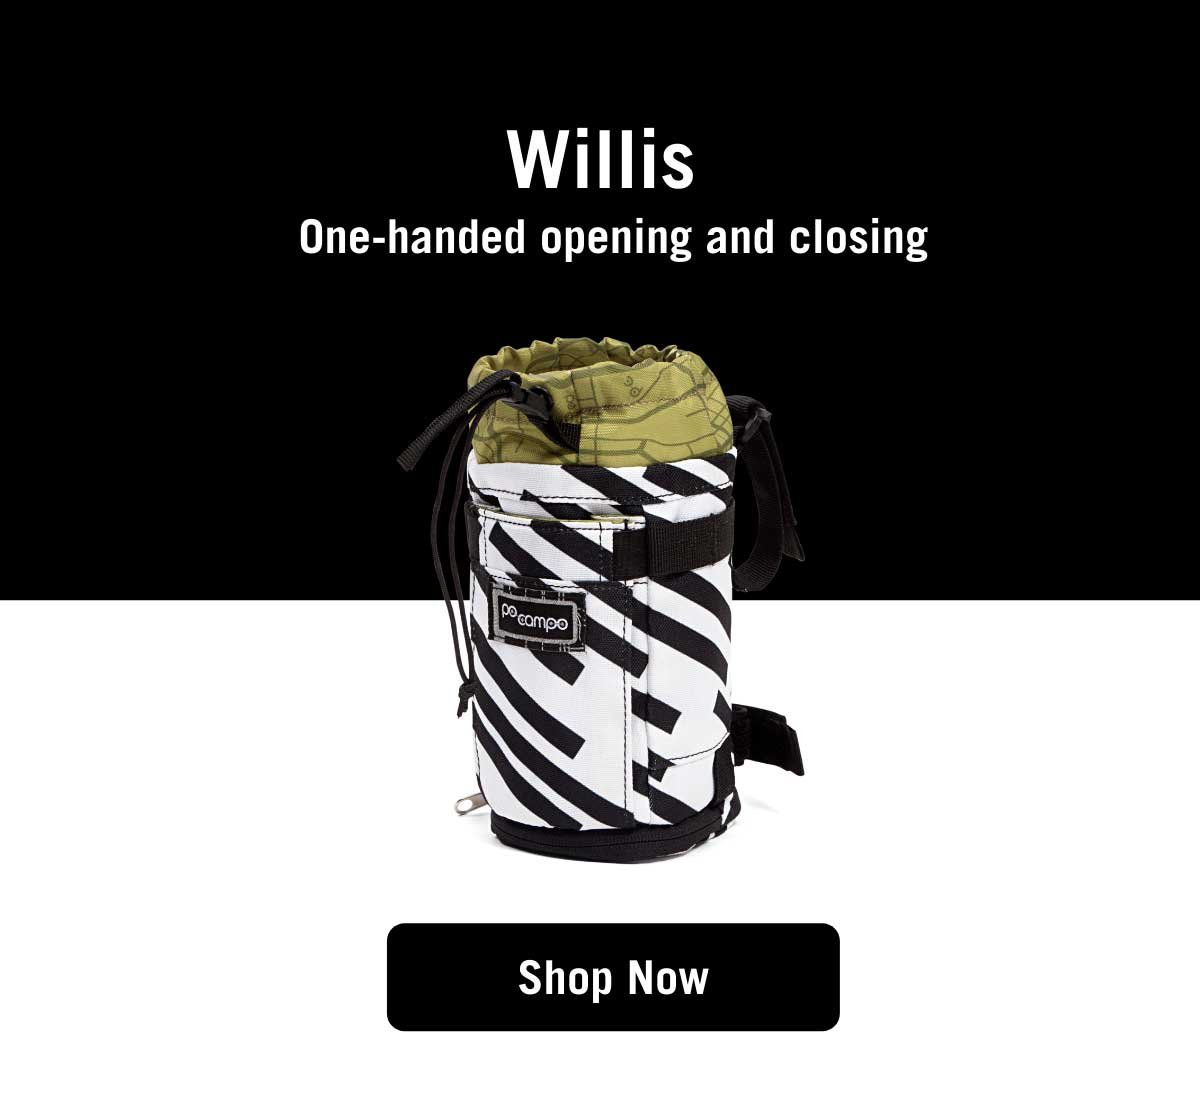 Willis. One-handed opening and closing.